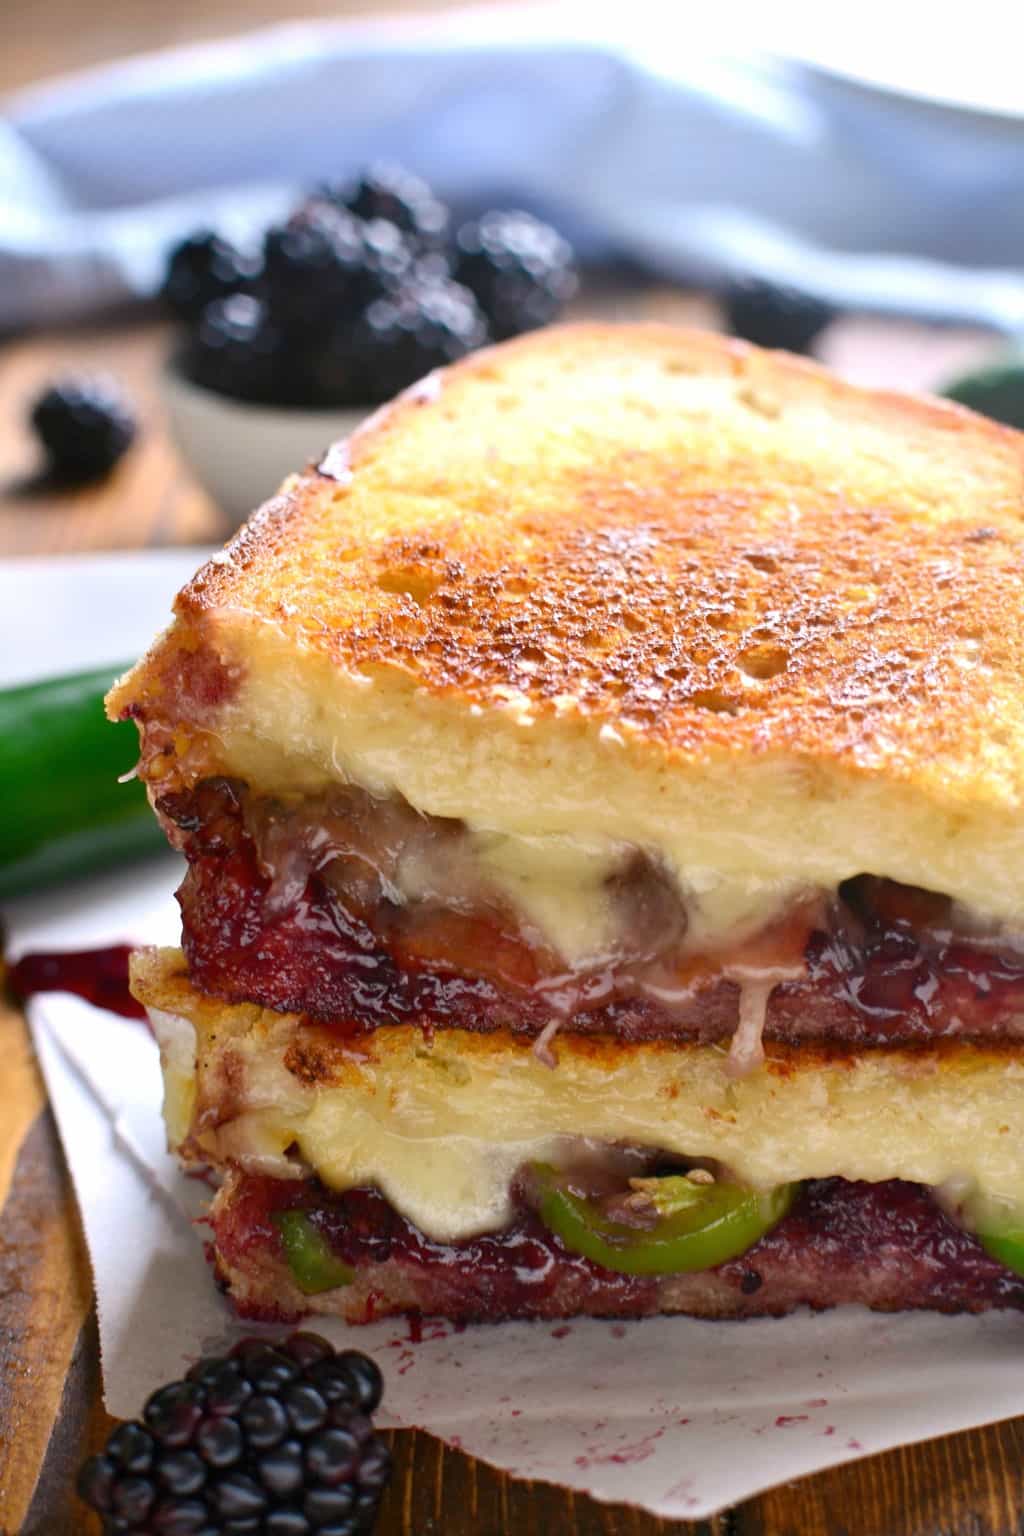 grilled cheese sandwich on white bread made with swiss cheese, blackberry jam, jalapenos and bacon